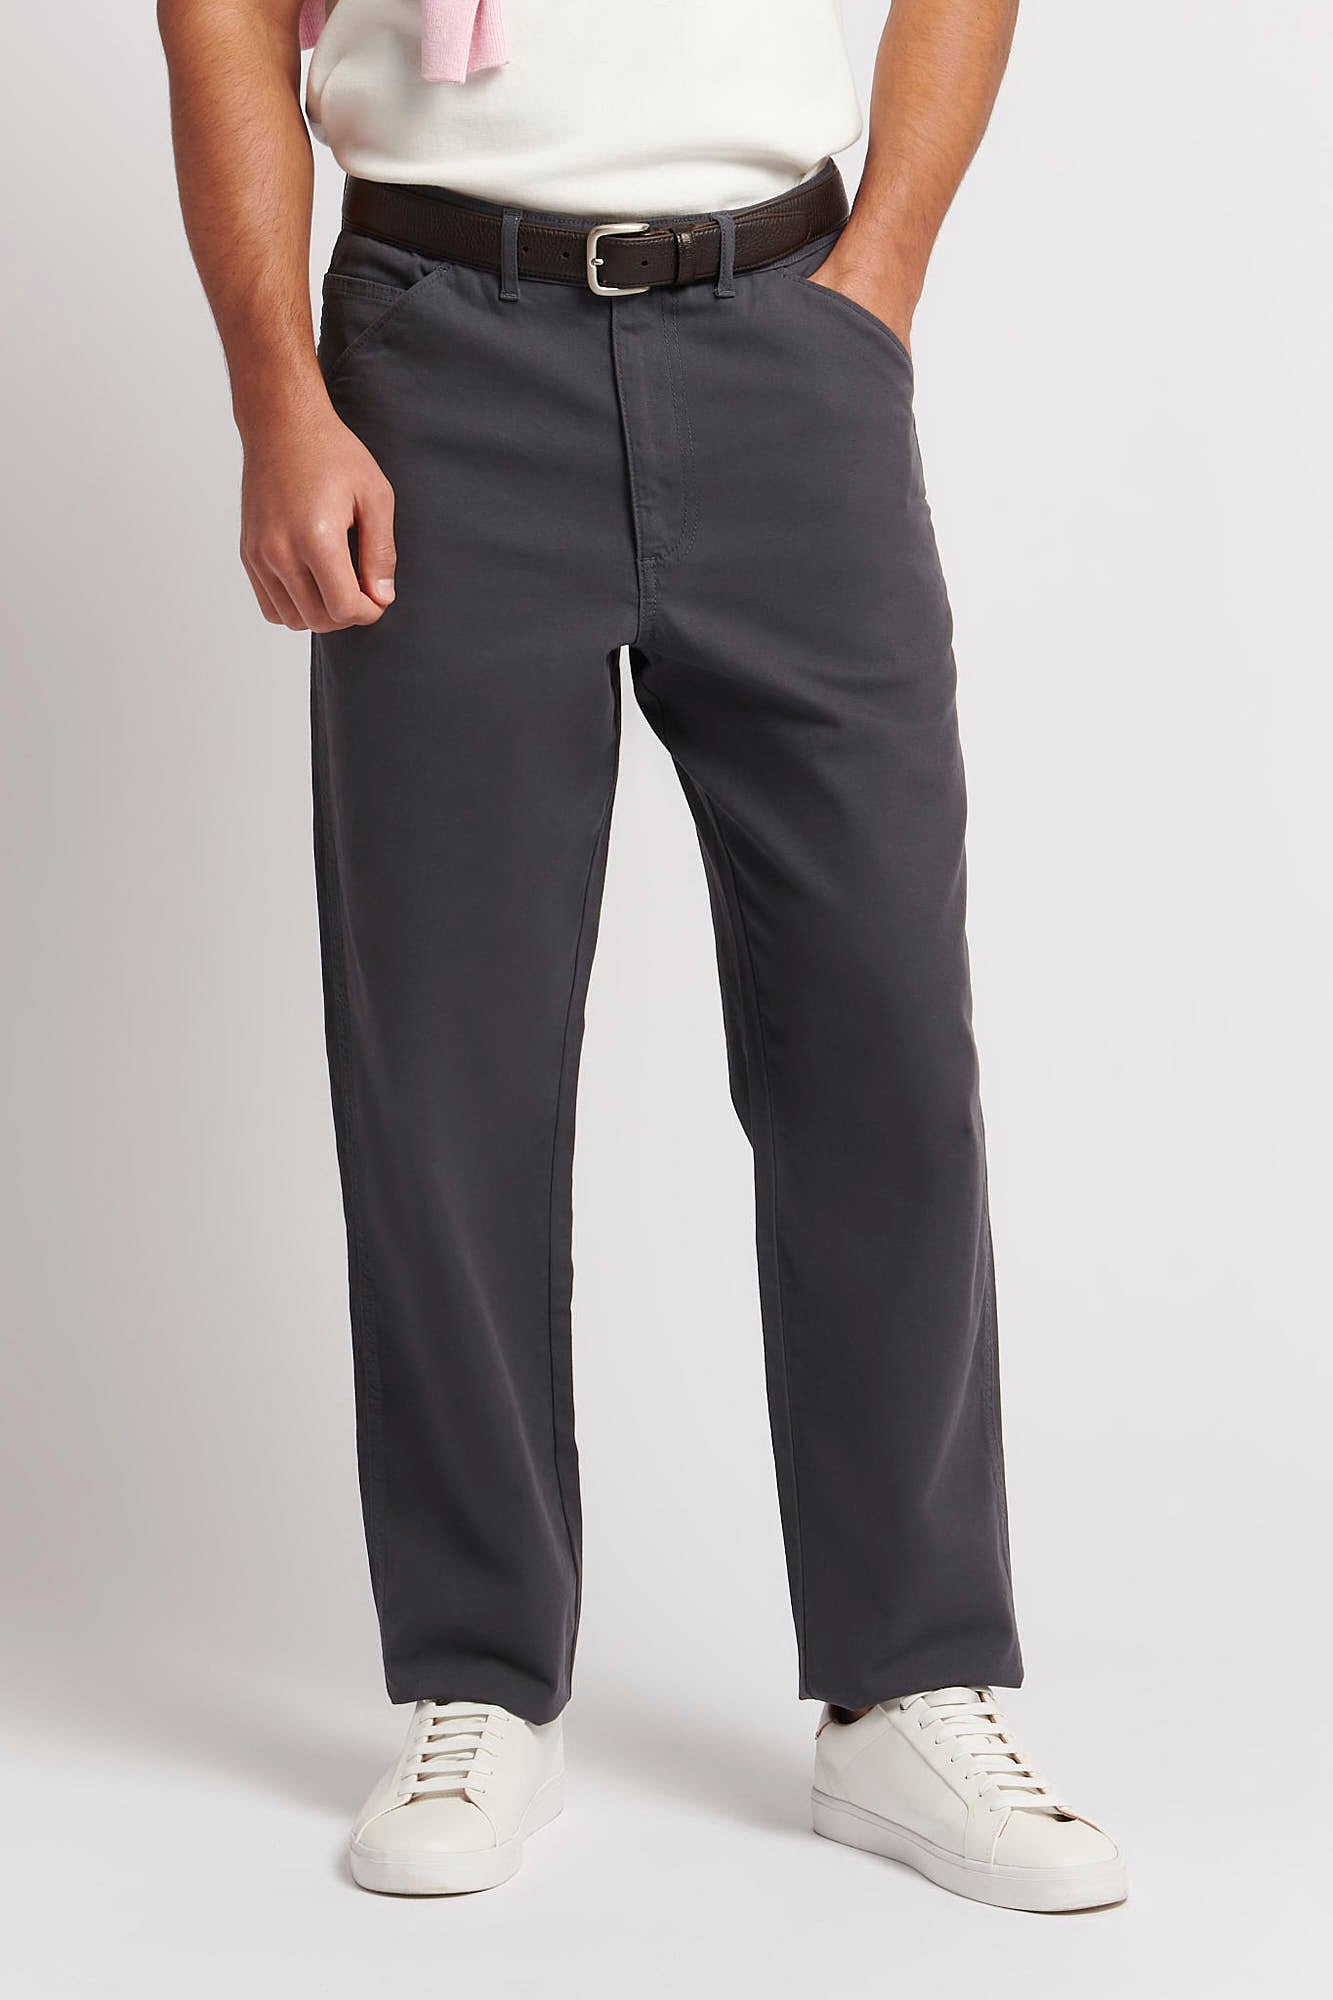 Buy Olive Trousers & Pants for Men by U.S. Polo Assn. Online